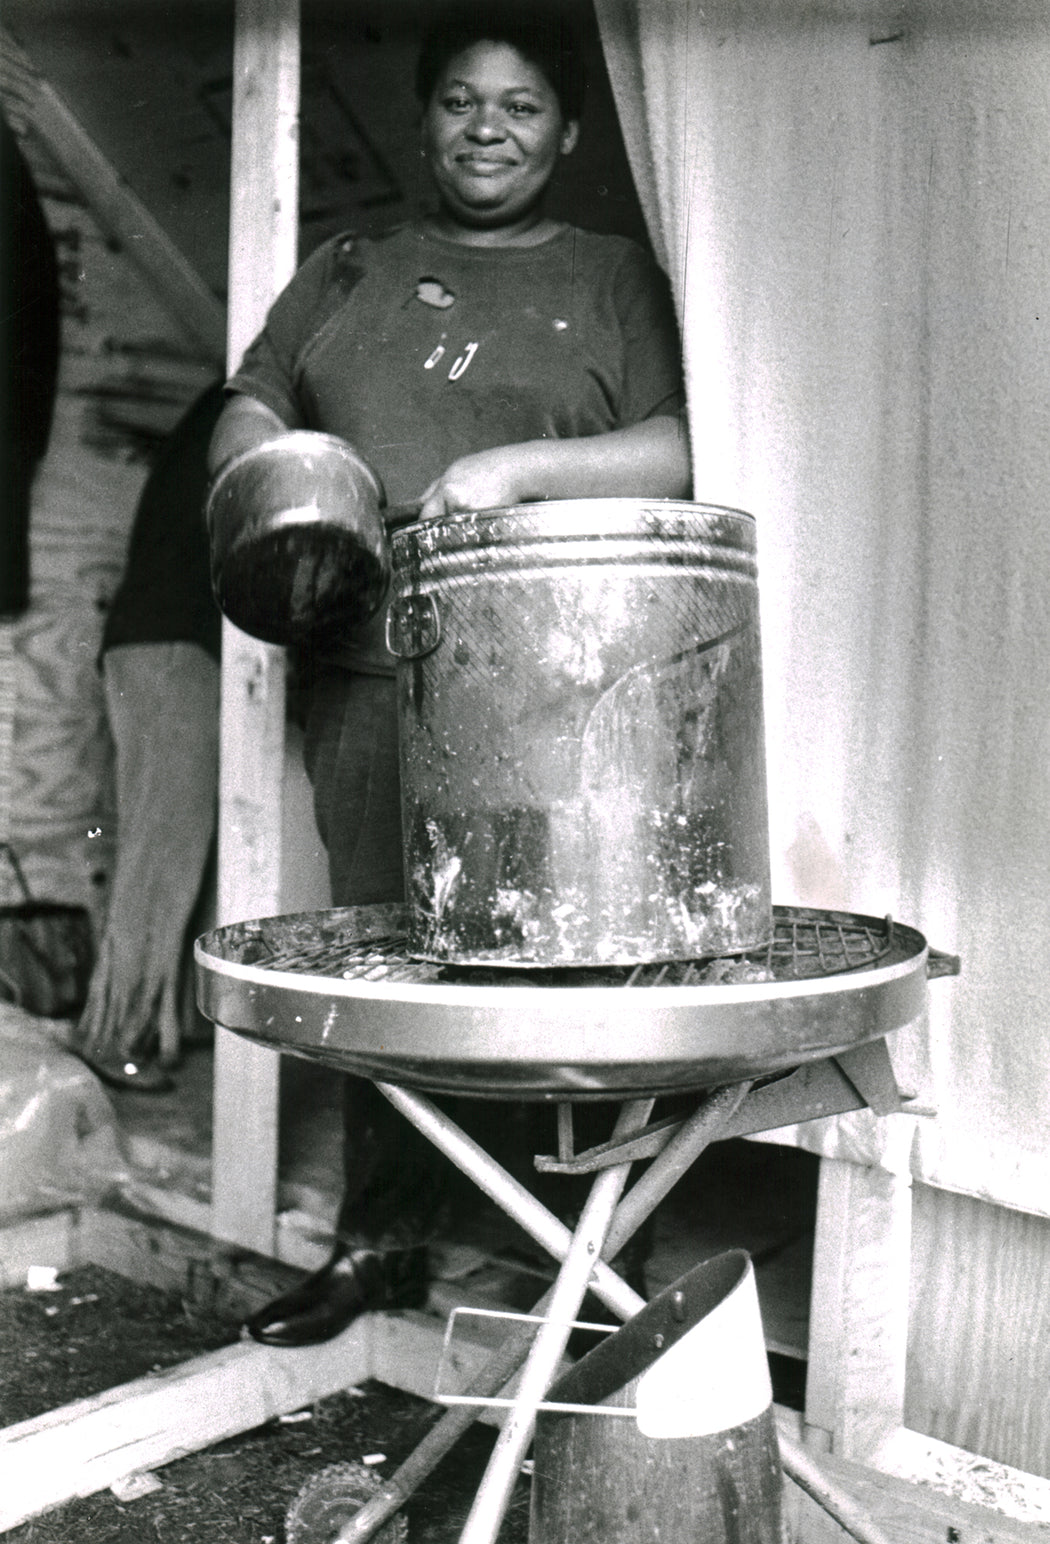 Untitled [Woman with large pot on BBQ]